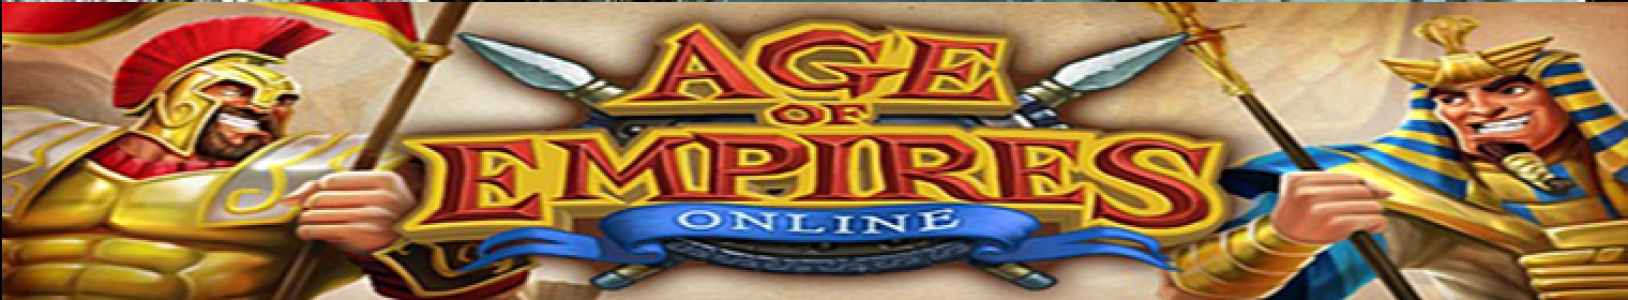 Age of Empires Online banner